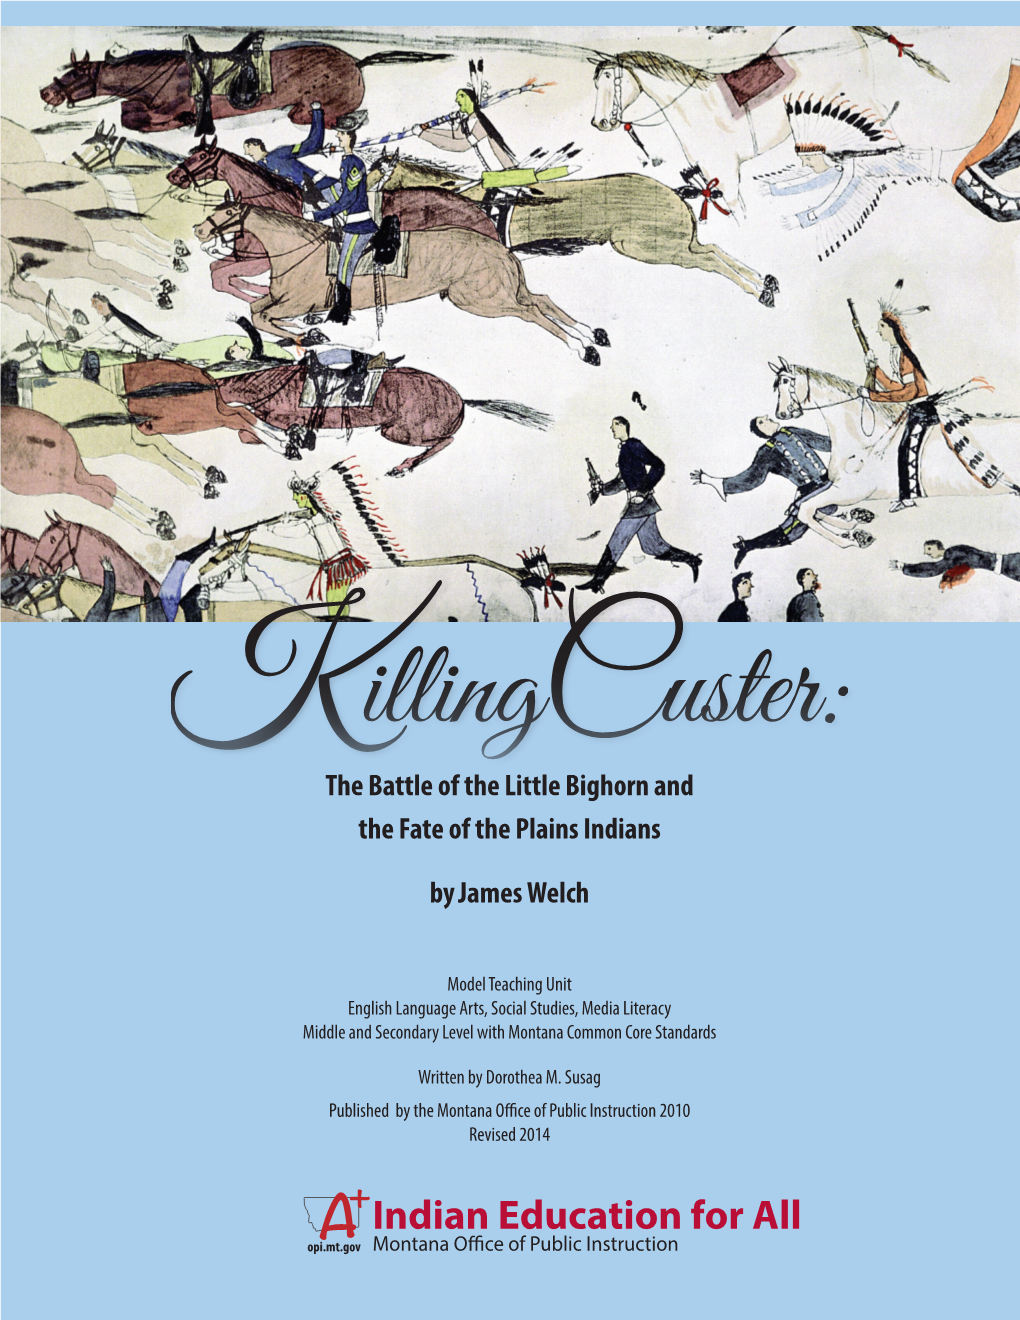 Killing Custer: the Battle of the Little Bighorn and the Fate of the Plains Indians